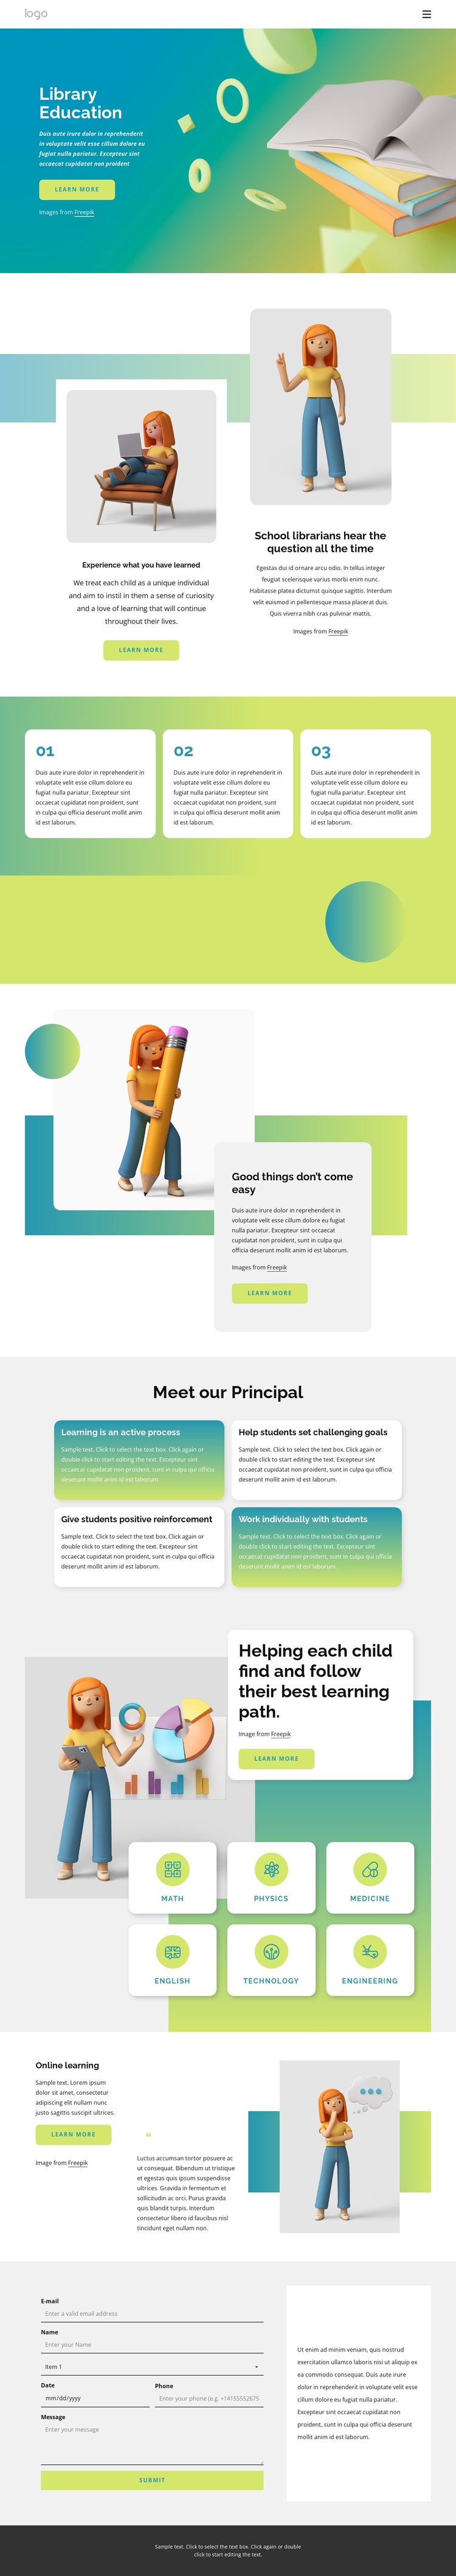 Education library Template